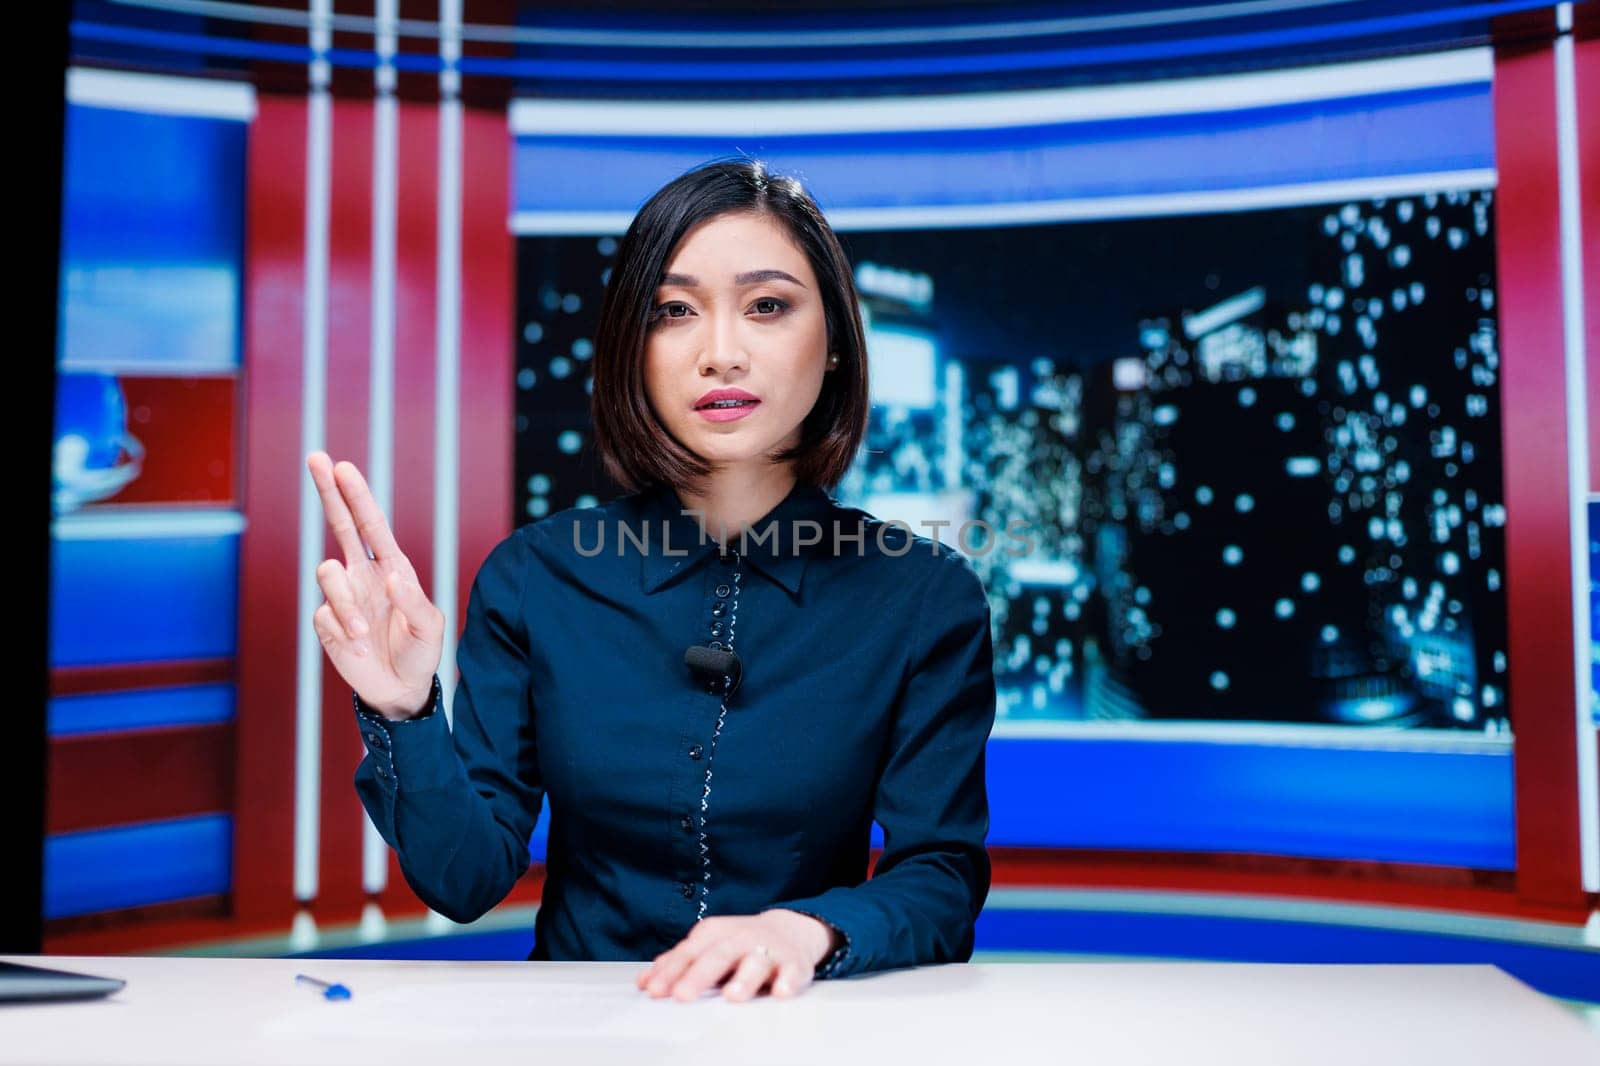 Presenter covering all breaking news topics and latest events occuring internationally, talking about issues in daily newscast reportage. Newscaster addressing celebrity drama in studio.